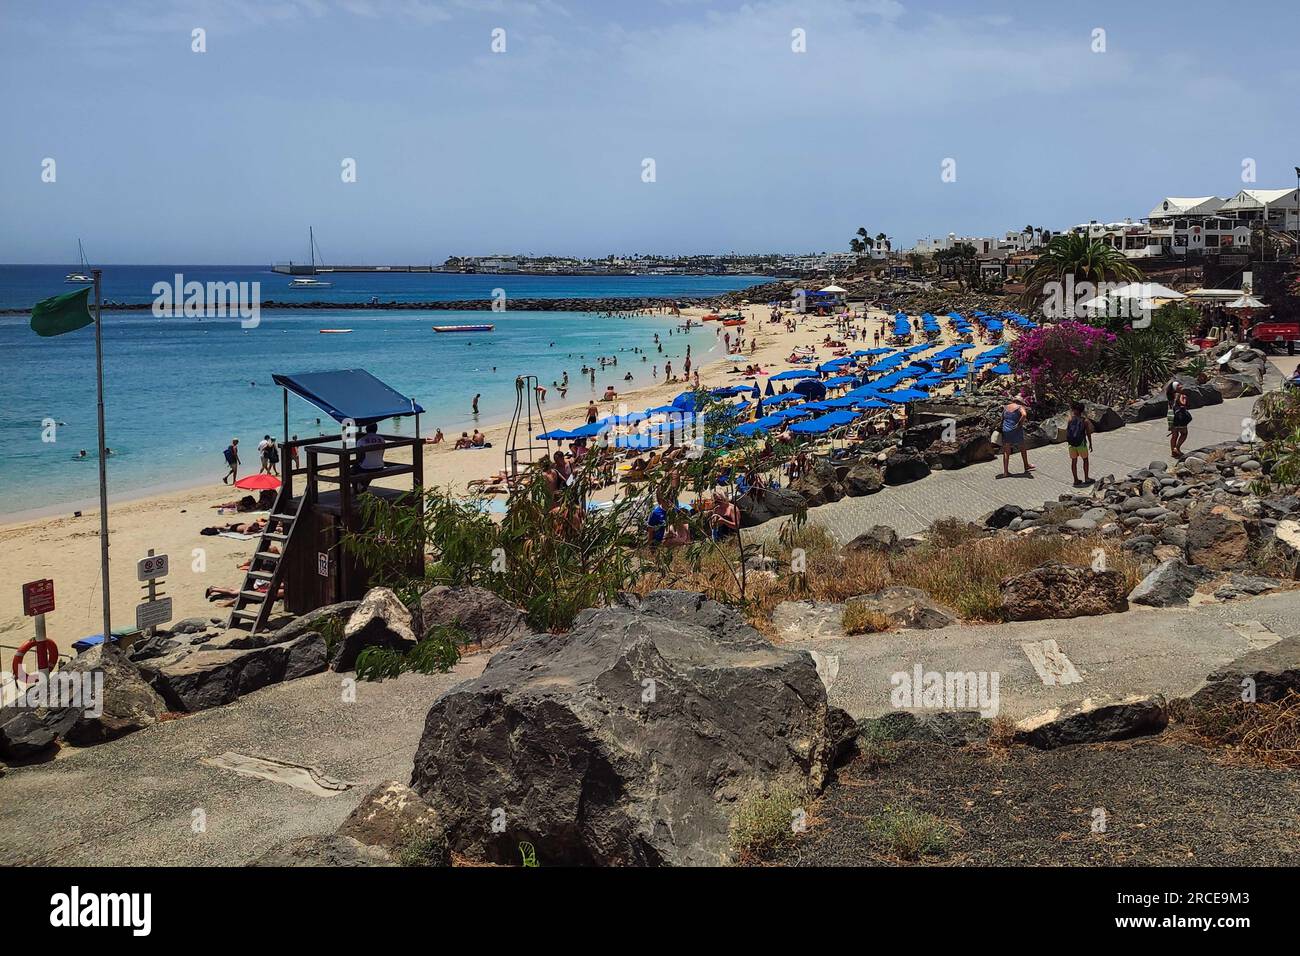 Playa Blanca, Lanzarote 14th July 2023. Sunseekers flocked to the beach at the resort of Playa Blanca as scorching conditions continued to batter Spain. Both British tourists and other nationalities cowered under parasols and enjoyed a strong, if not very warm sea breeze. The popular Lanzarote destination on the south of the Spanish island in the Canaries boasts white sand and crystal clear waters. Credit: Stop Press Media/Alamy Live News Stock Photo